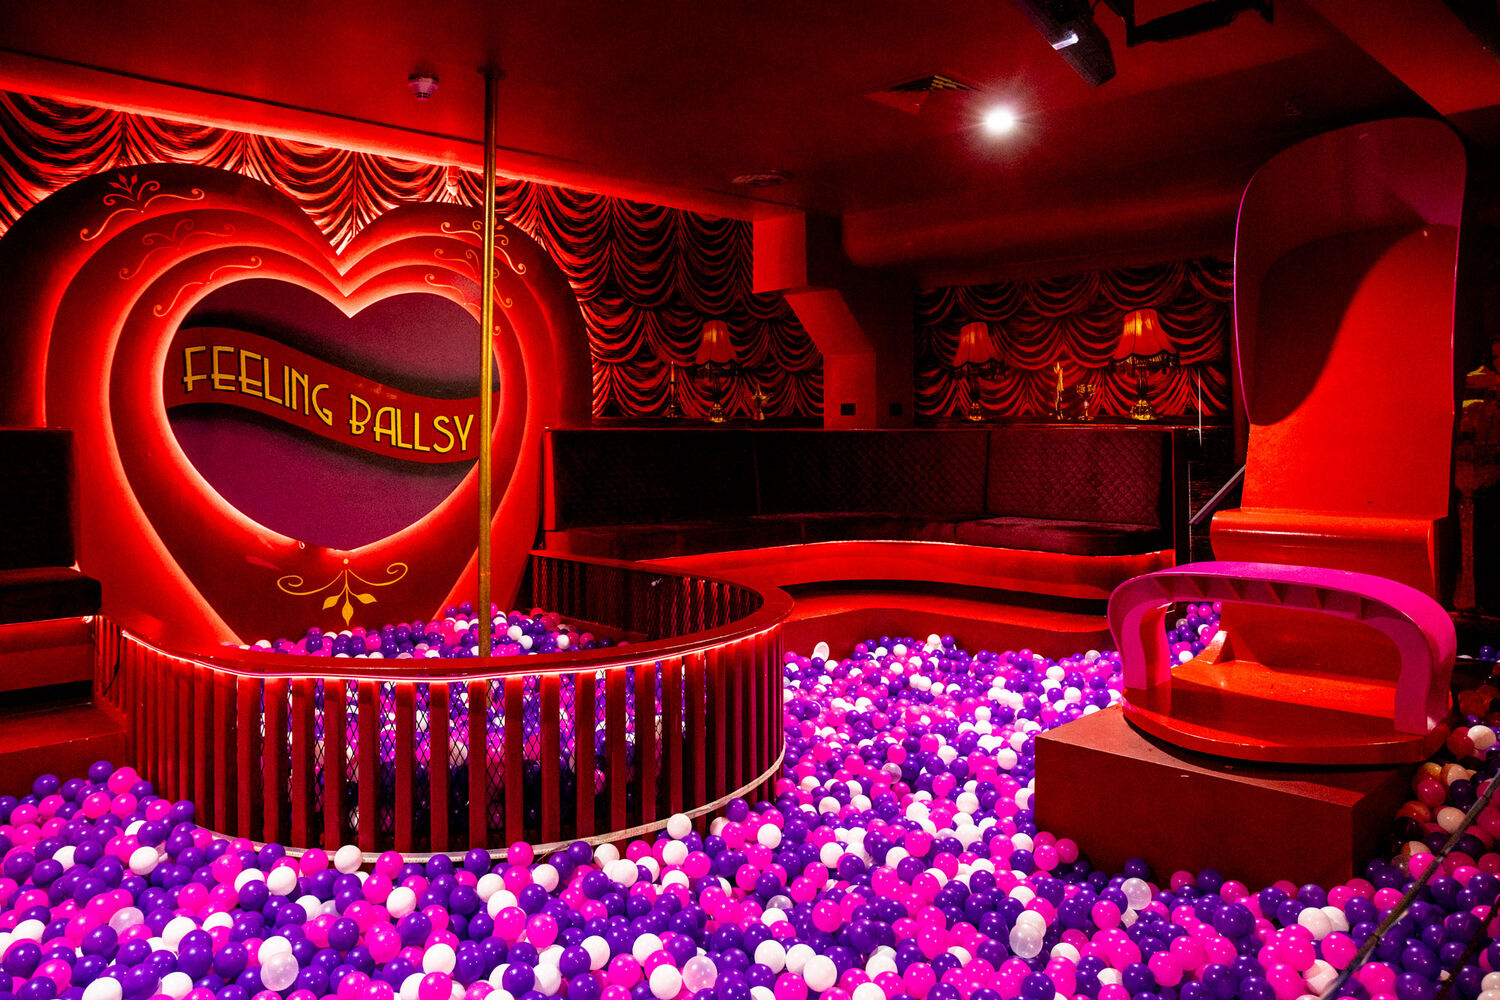 Burlesque Inspired Private Room & Function Space for Birthdays, Corporate Bookings, Special Events with Darts, Ball Pit, Karaoke, Private Bar, Dancing Pole | Food & Drinks |  Melbourne